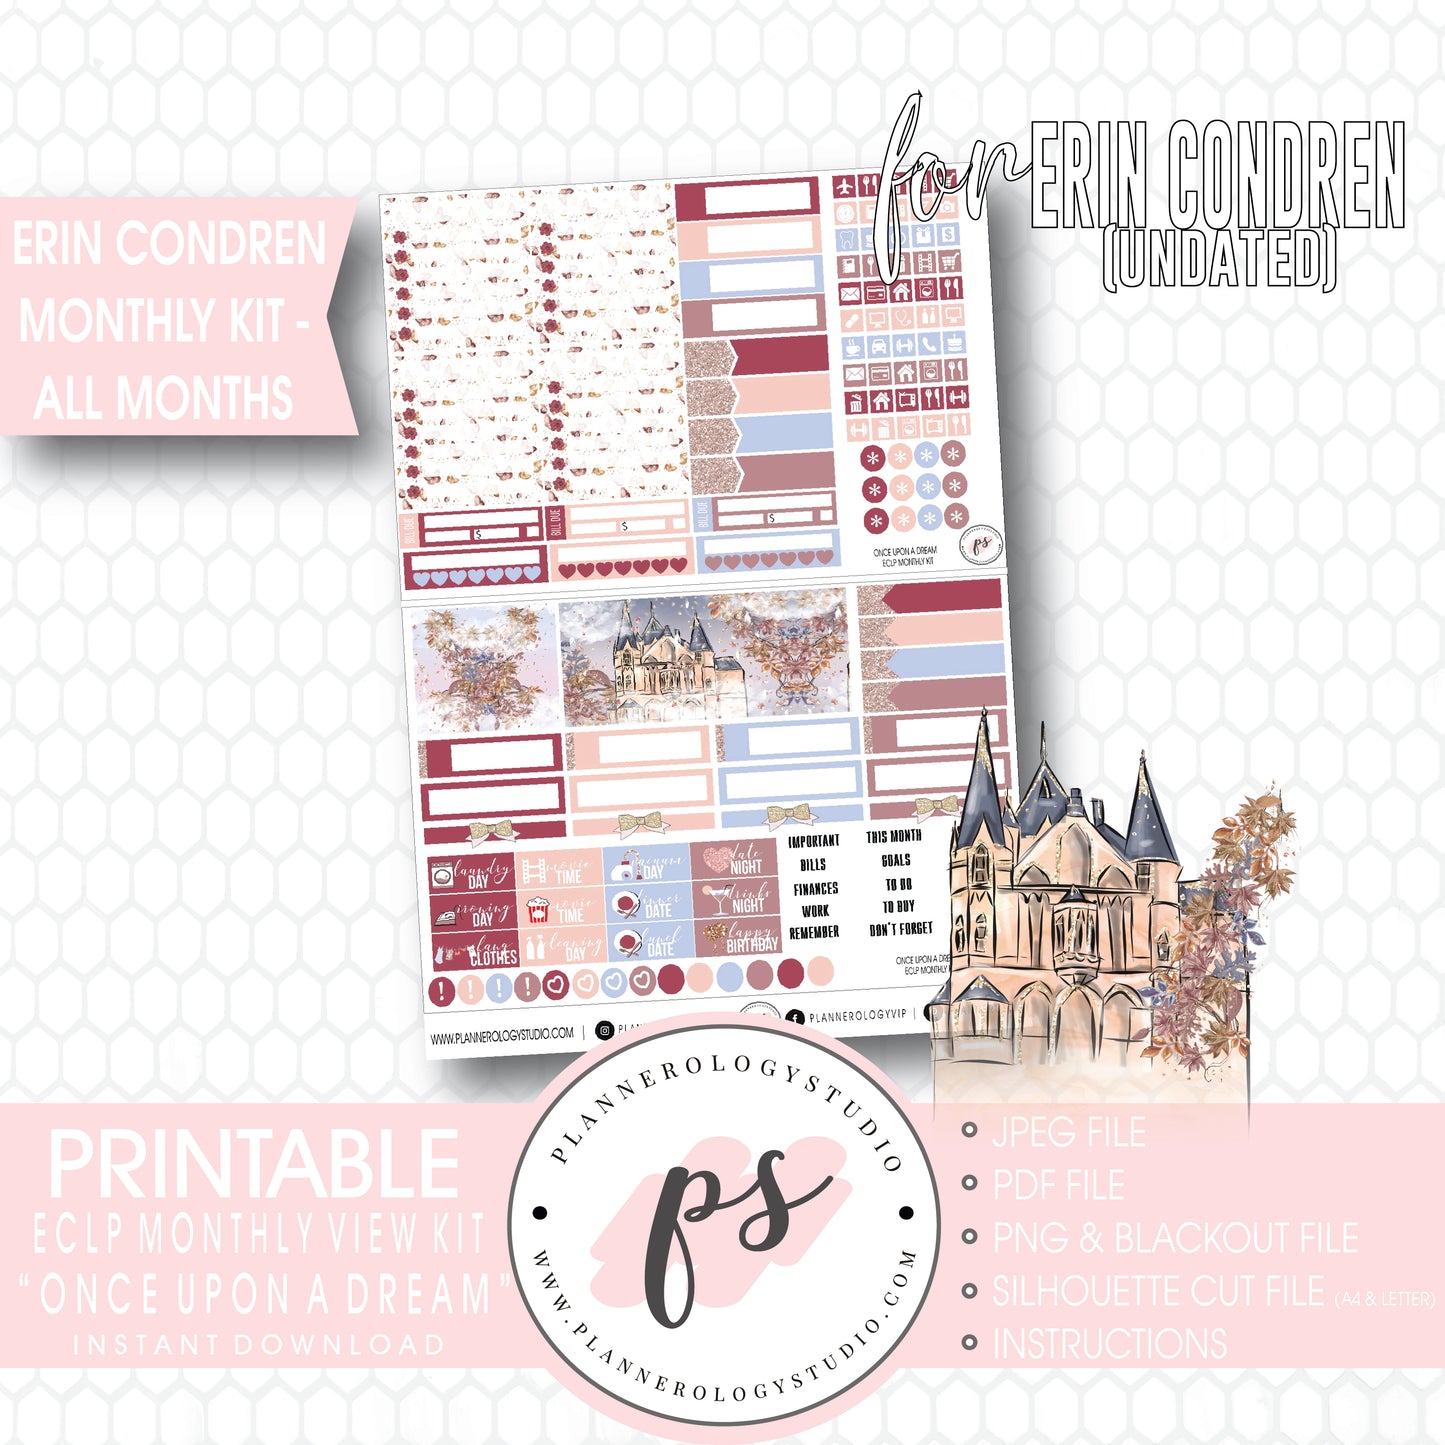 Once Upon a Dream Undated Monthly View Kit (All Months) Digital Printable Planner Stickers (for use with Erin Condren) - Plannerologystudio